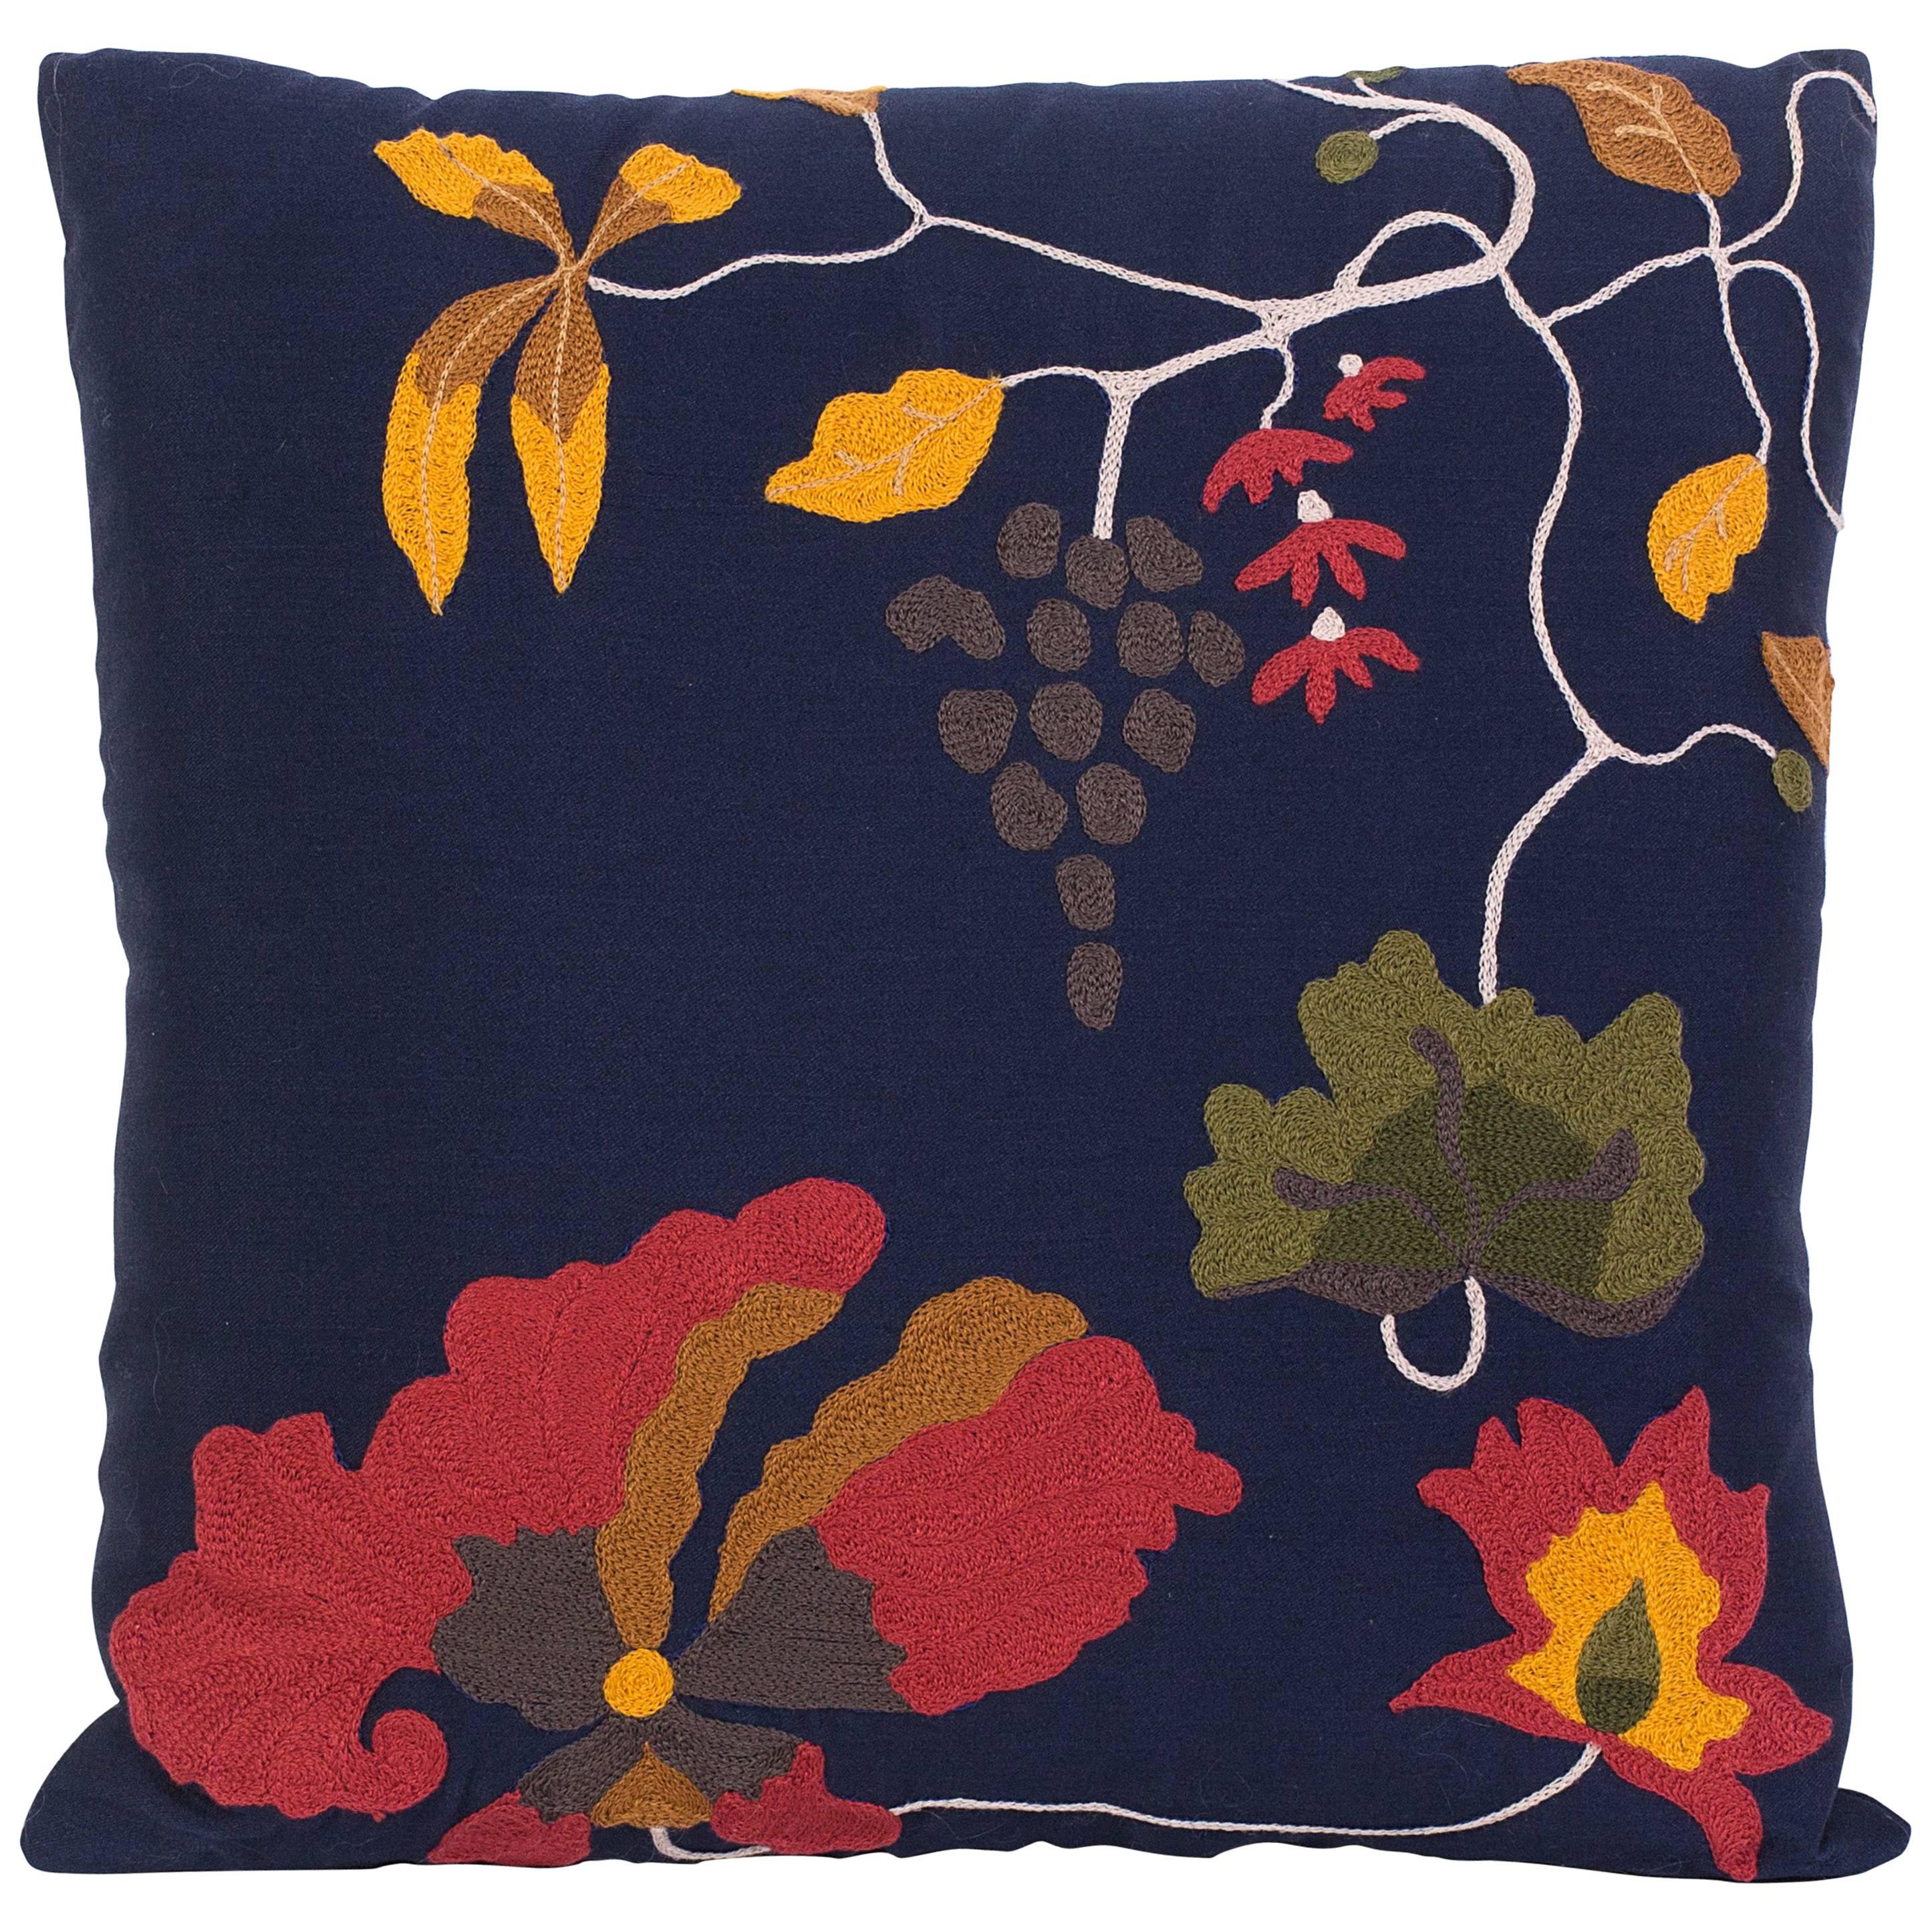 Silk Wool Sateen Hand-Embroidered Floral Decorative Pillow